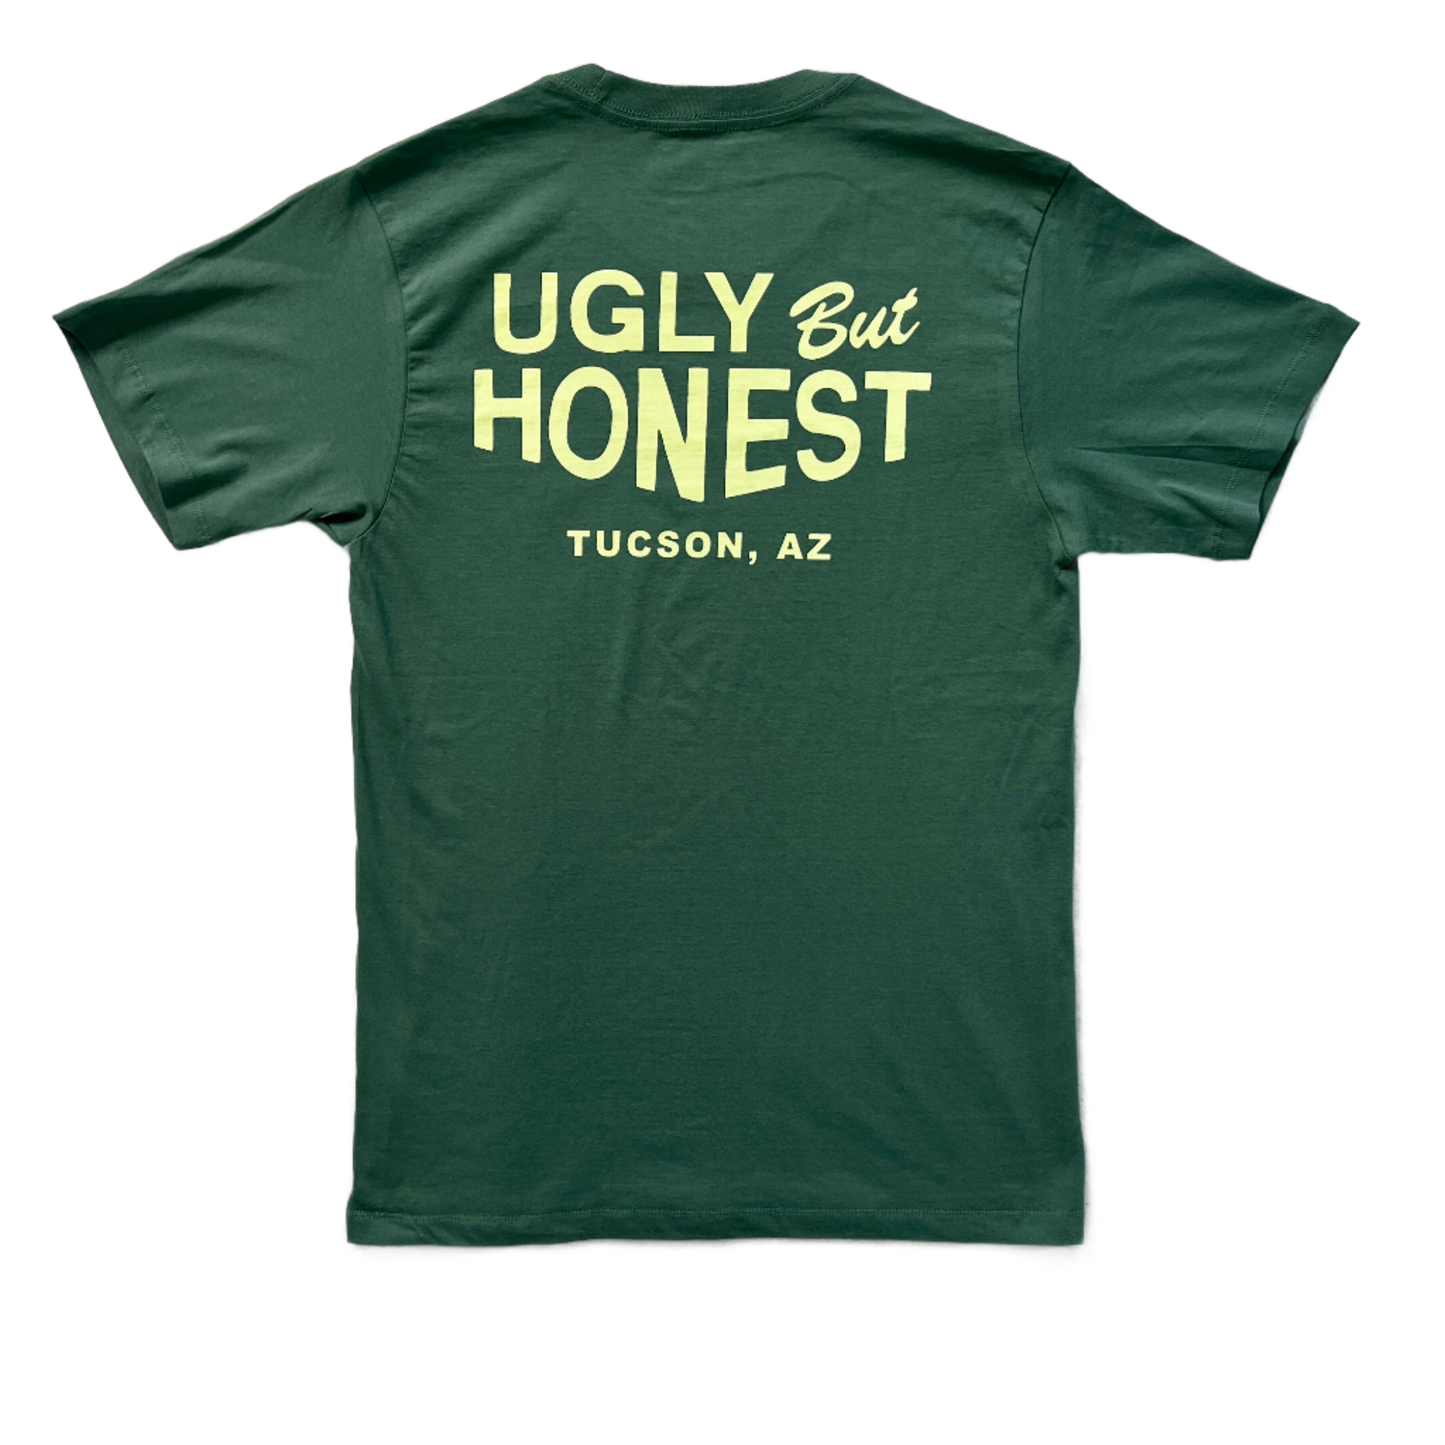 "Ugly But Honest" - Pine Tee